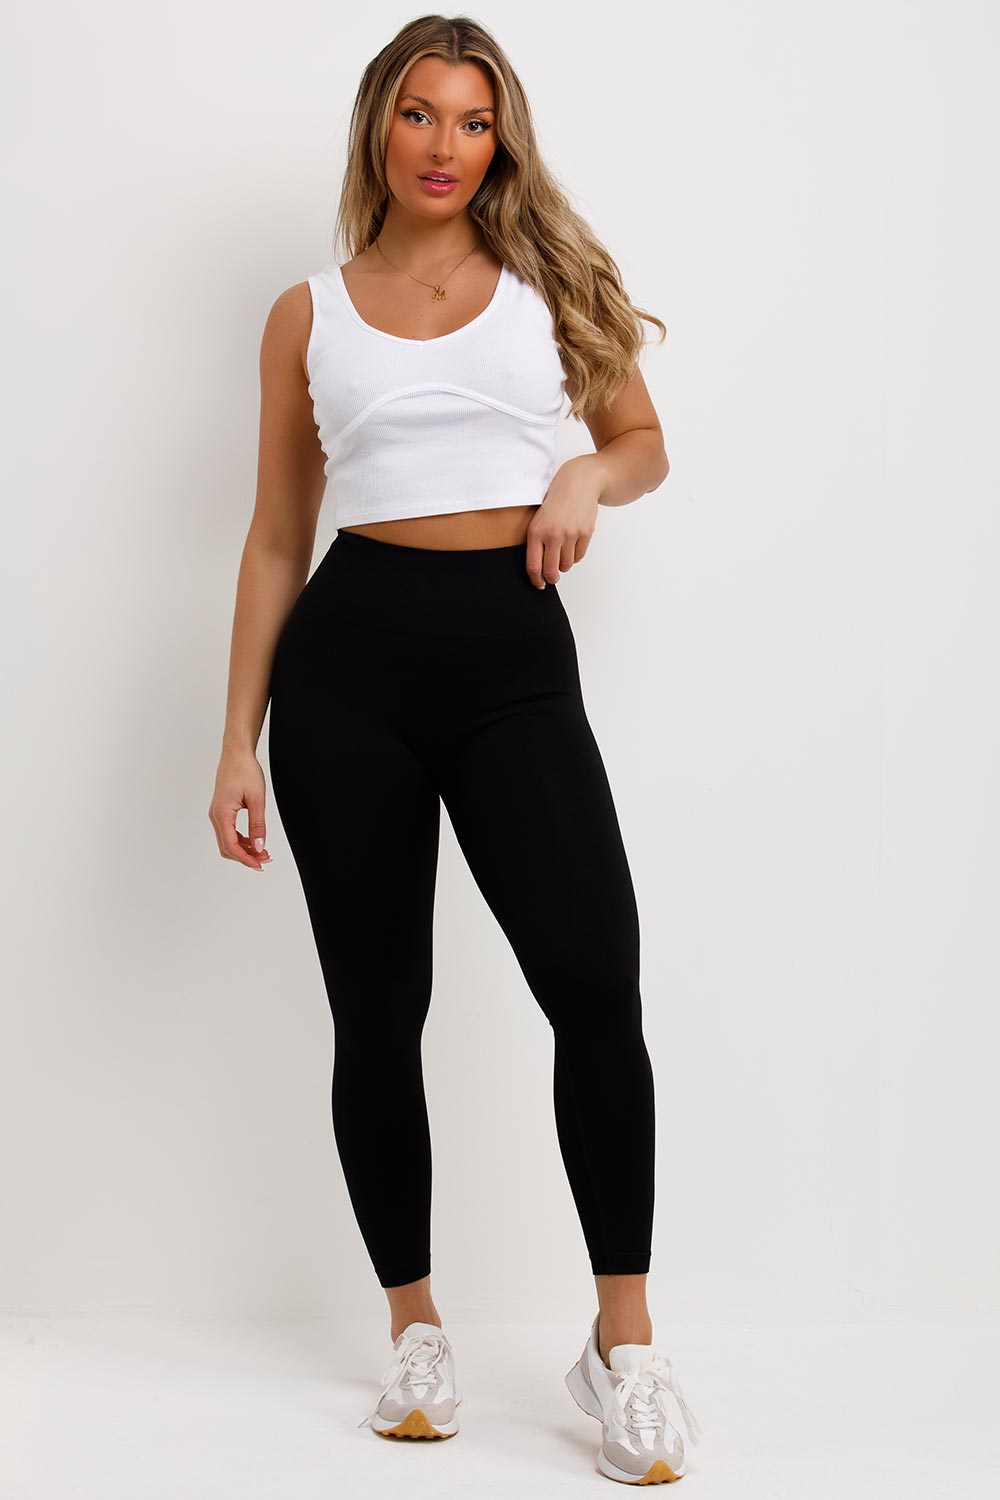 Best gym leggings hand-picked (and tested) by Team Cosmo | Gym leggings,  Super high waisted leggings, High waisted yoga leggings